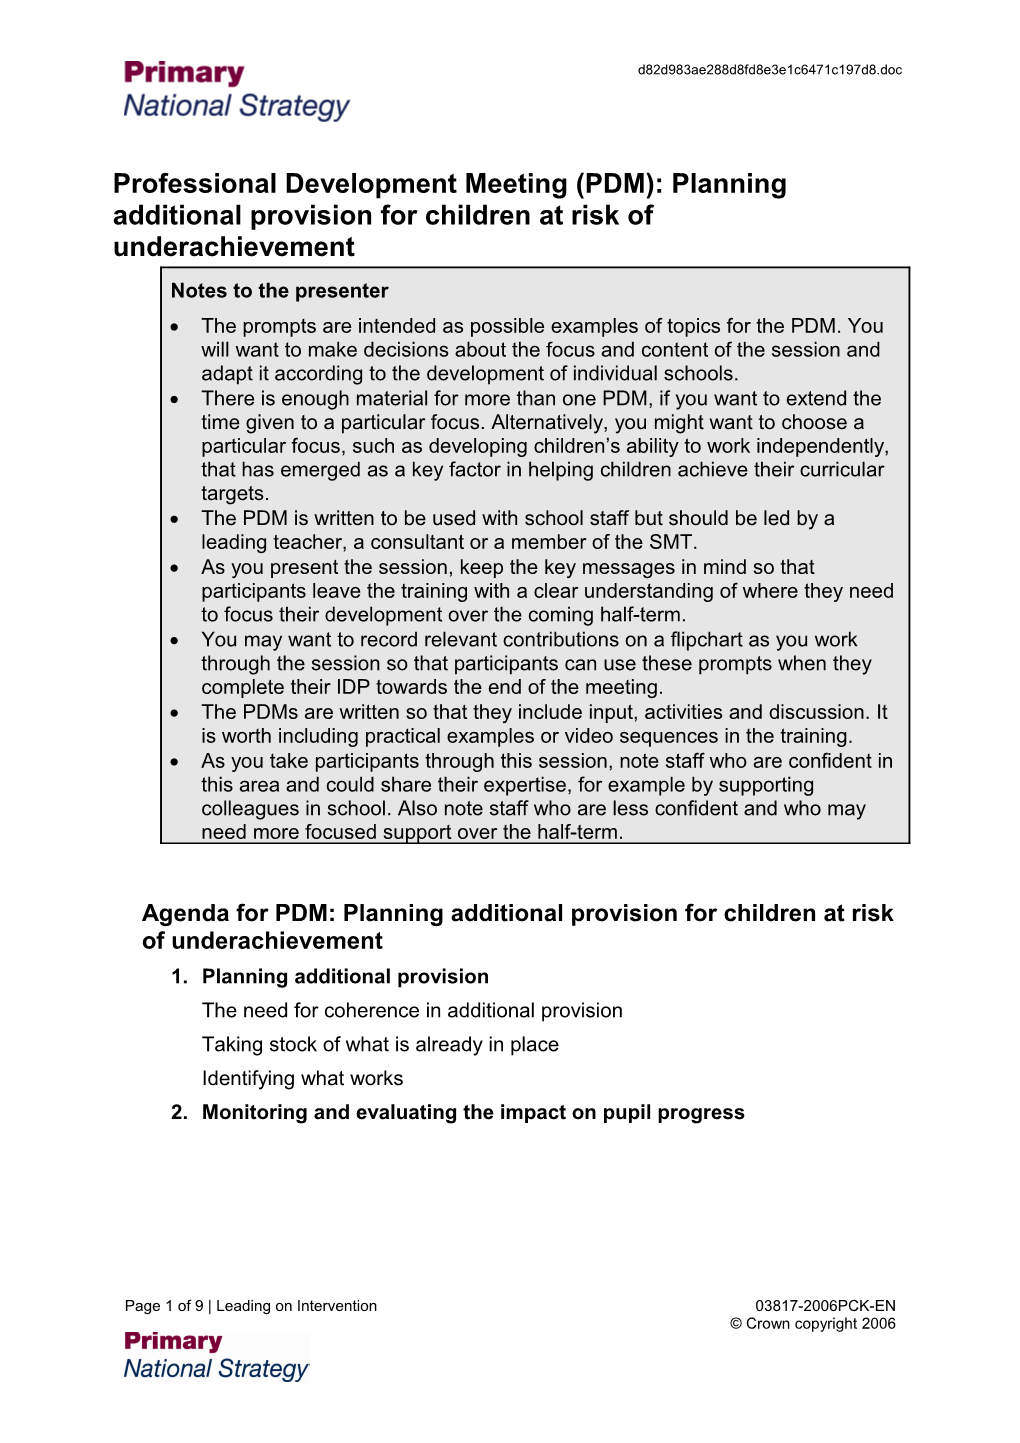 Professional Development Meeting (PDM): Planning Additional Provision for Children At